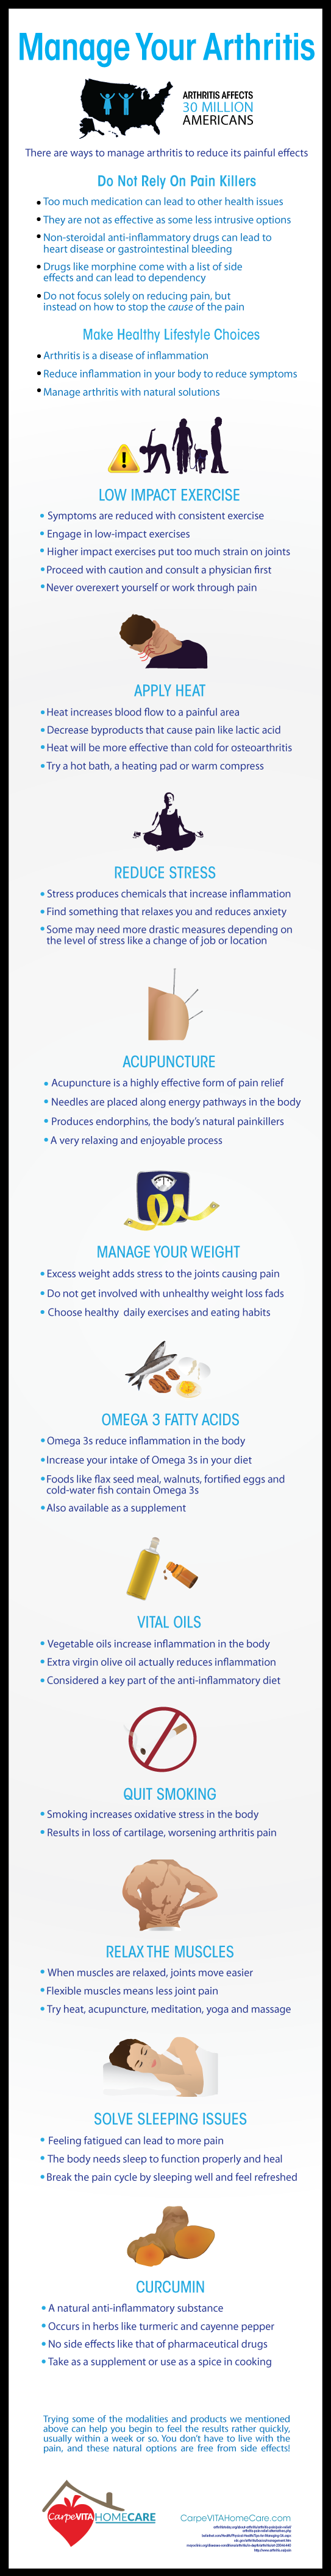 Infographic-How-To-Manage-Arthritis